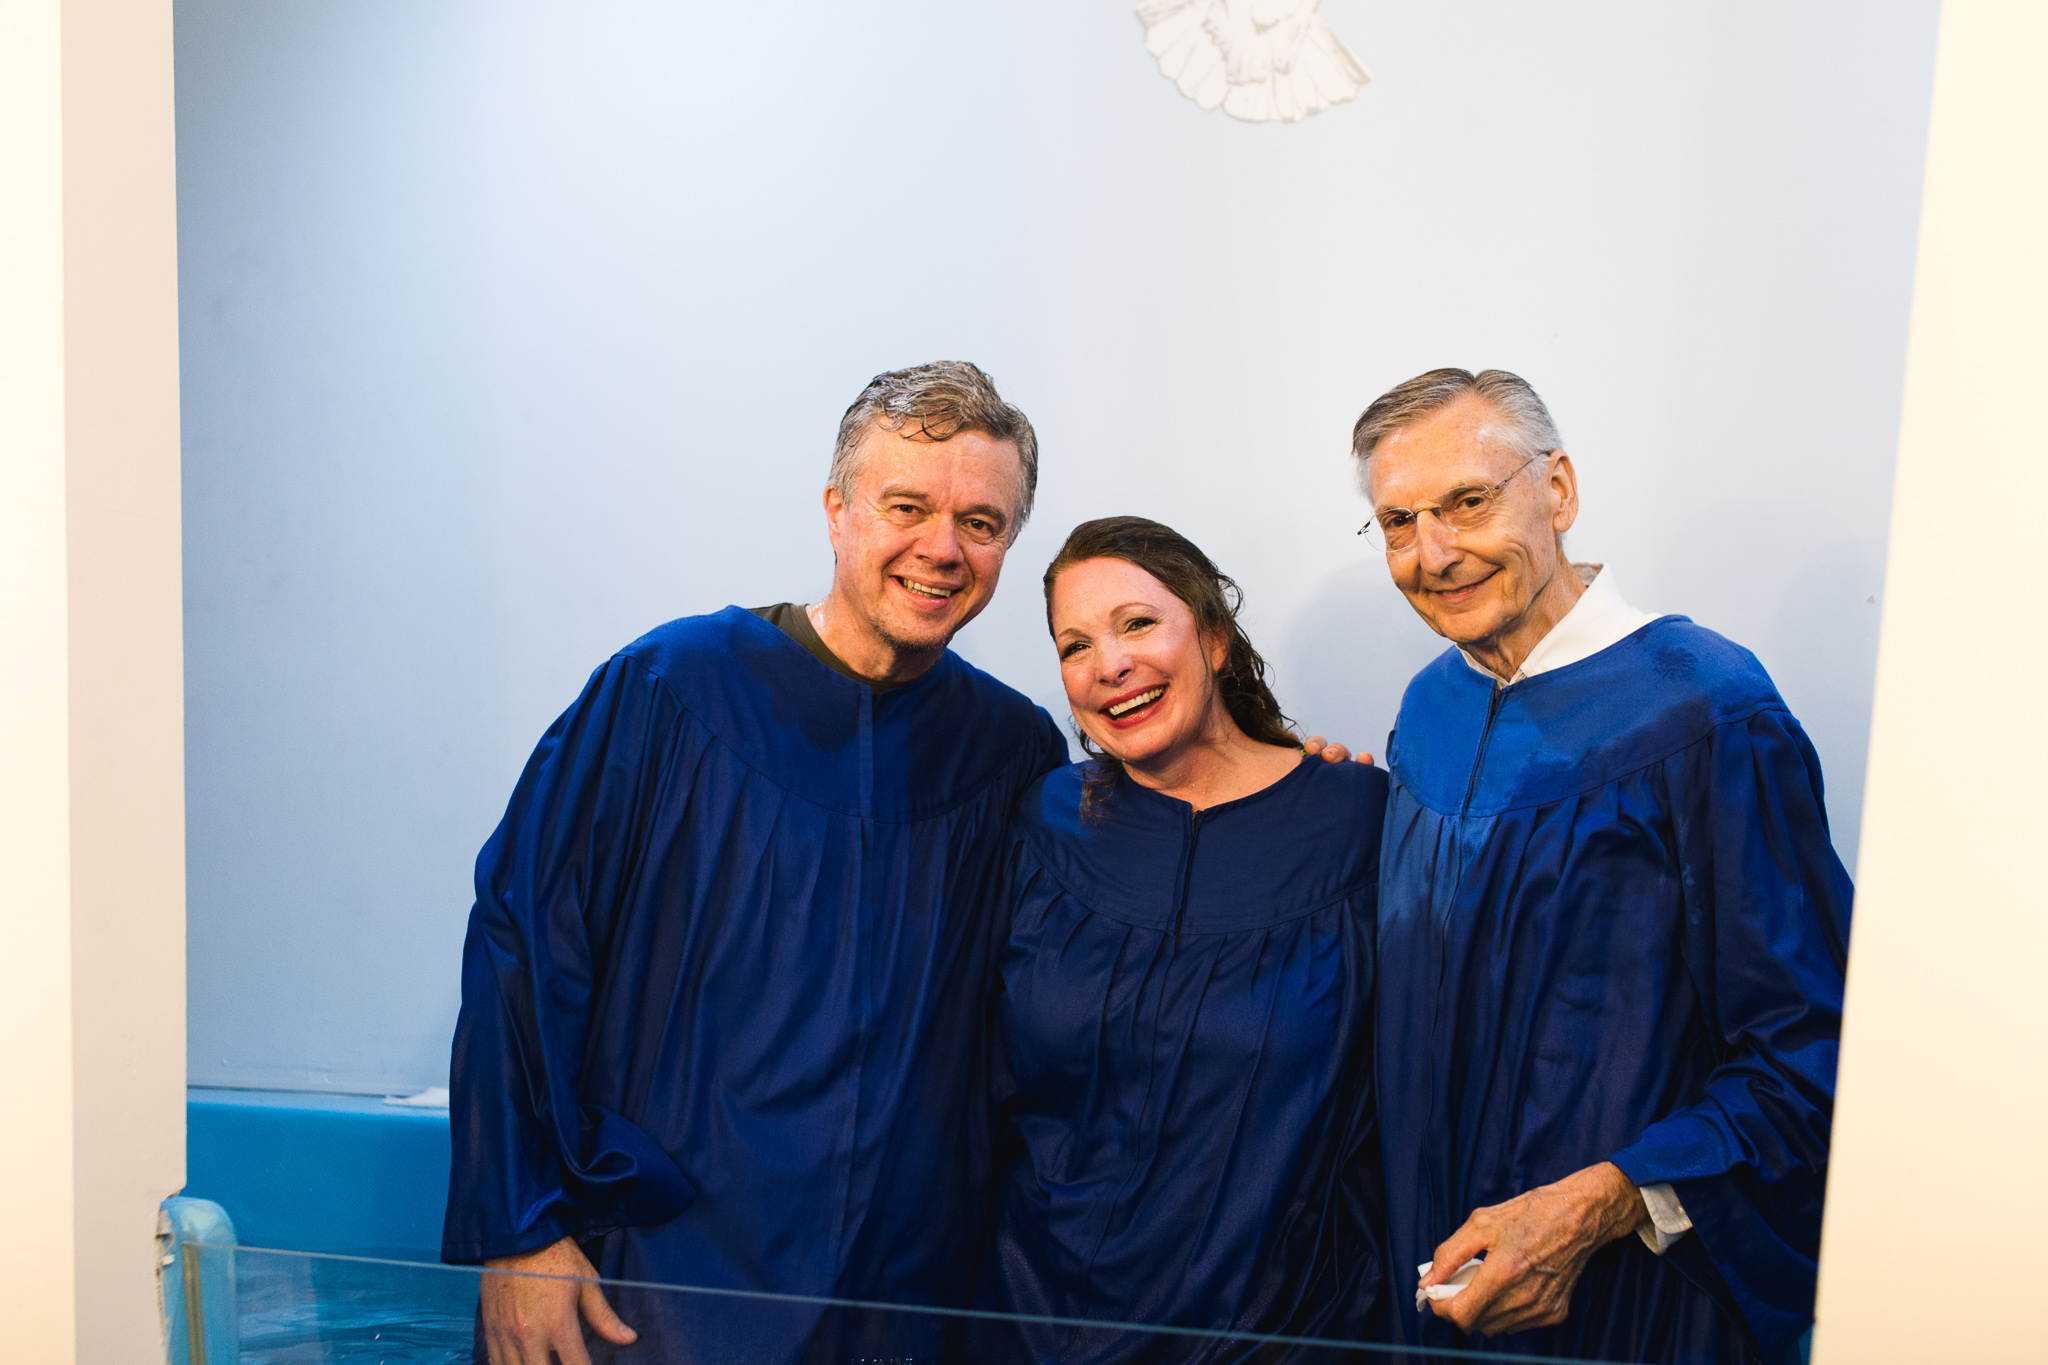 Hayes and Paige Parnell smile alongside Pastor Edward Skoretz after their baptism at Summerville Seventh-day Adventist Church in Summerville, Georgia.